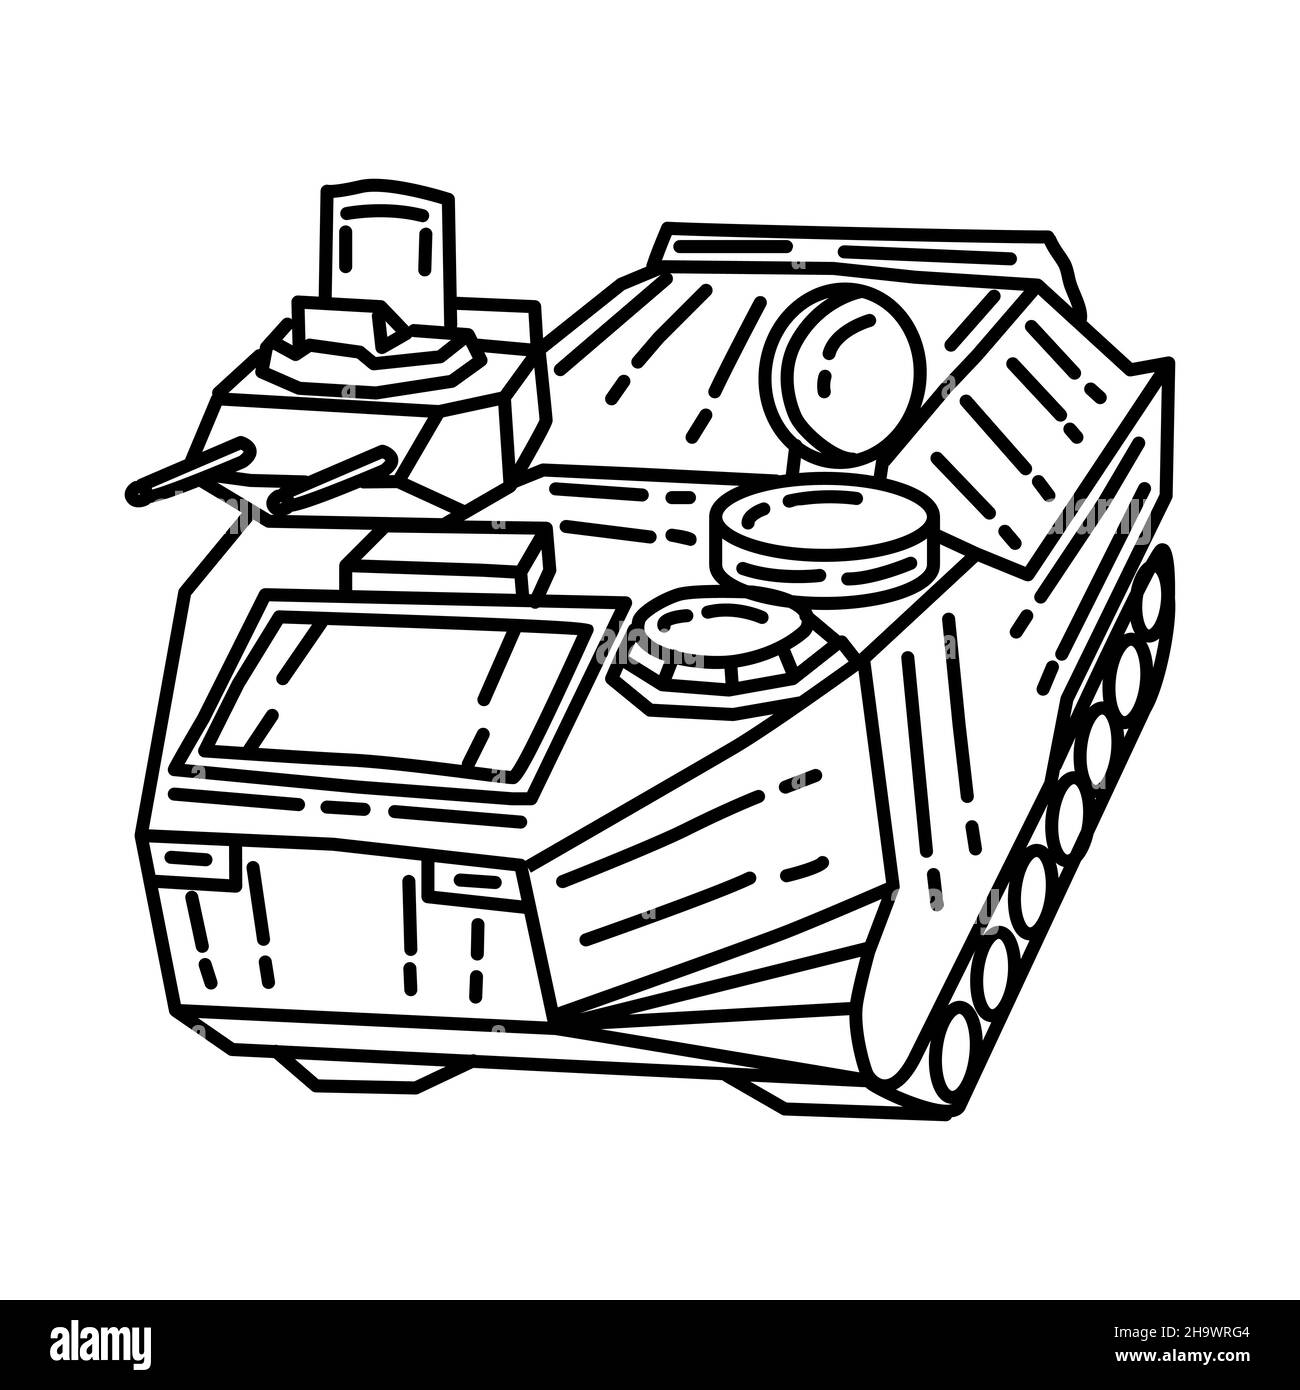 Marine Amphibious Assault Vehicle Part of Military and Marine Corps Equipments Hand Drawn Icon Set Vector Stock Vector